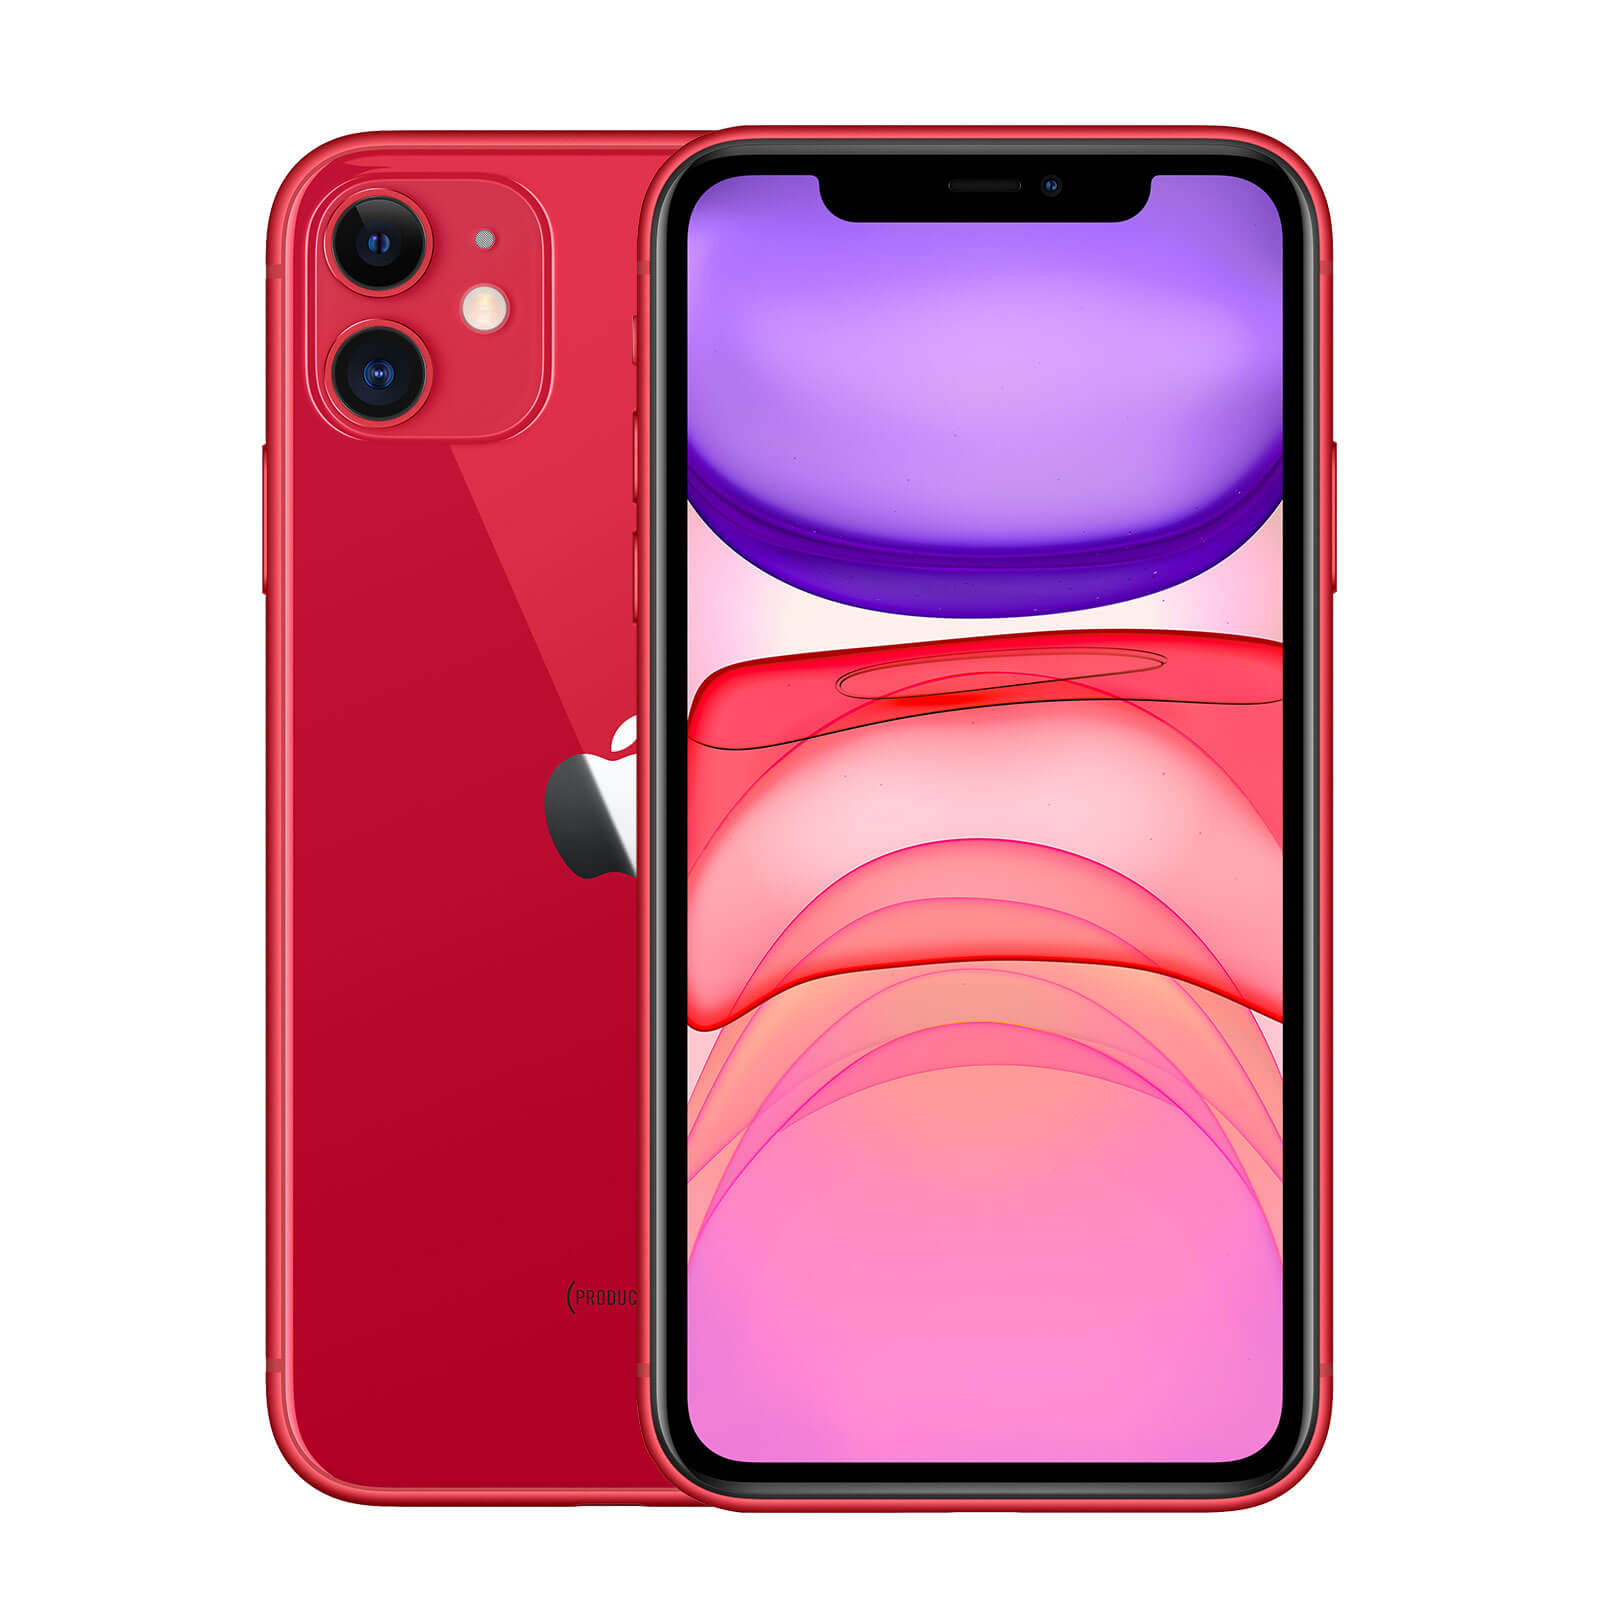 Apple iPhone 11 128GB Product Red Impecable - Desbloqueado